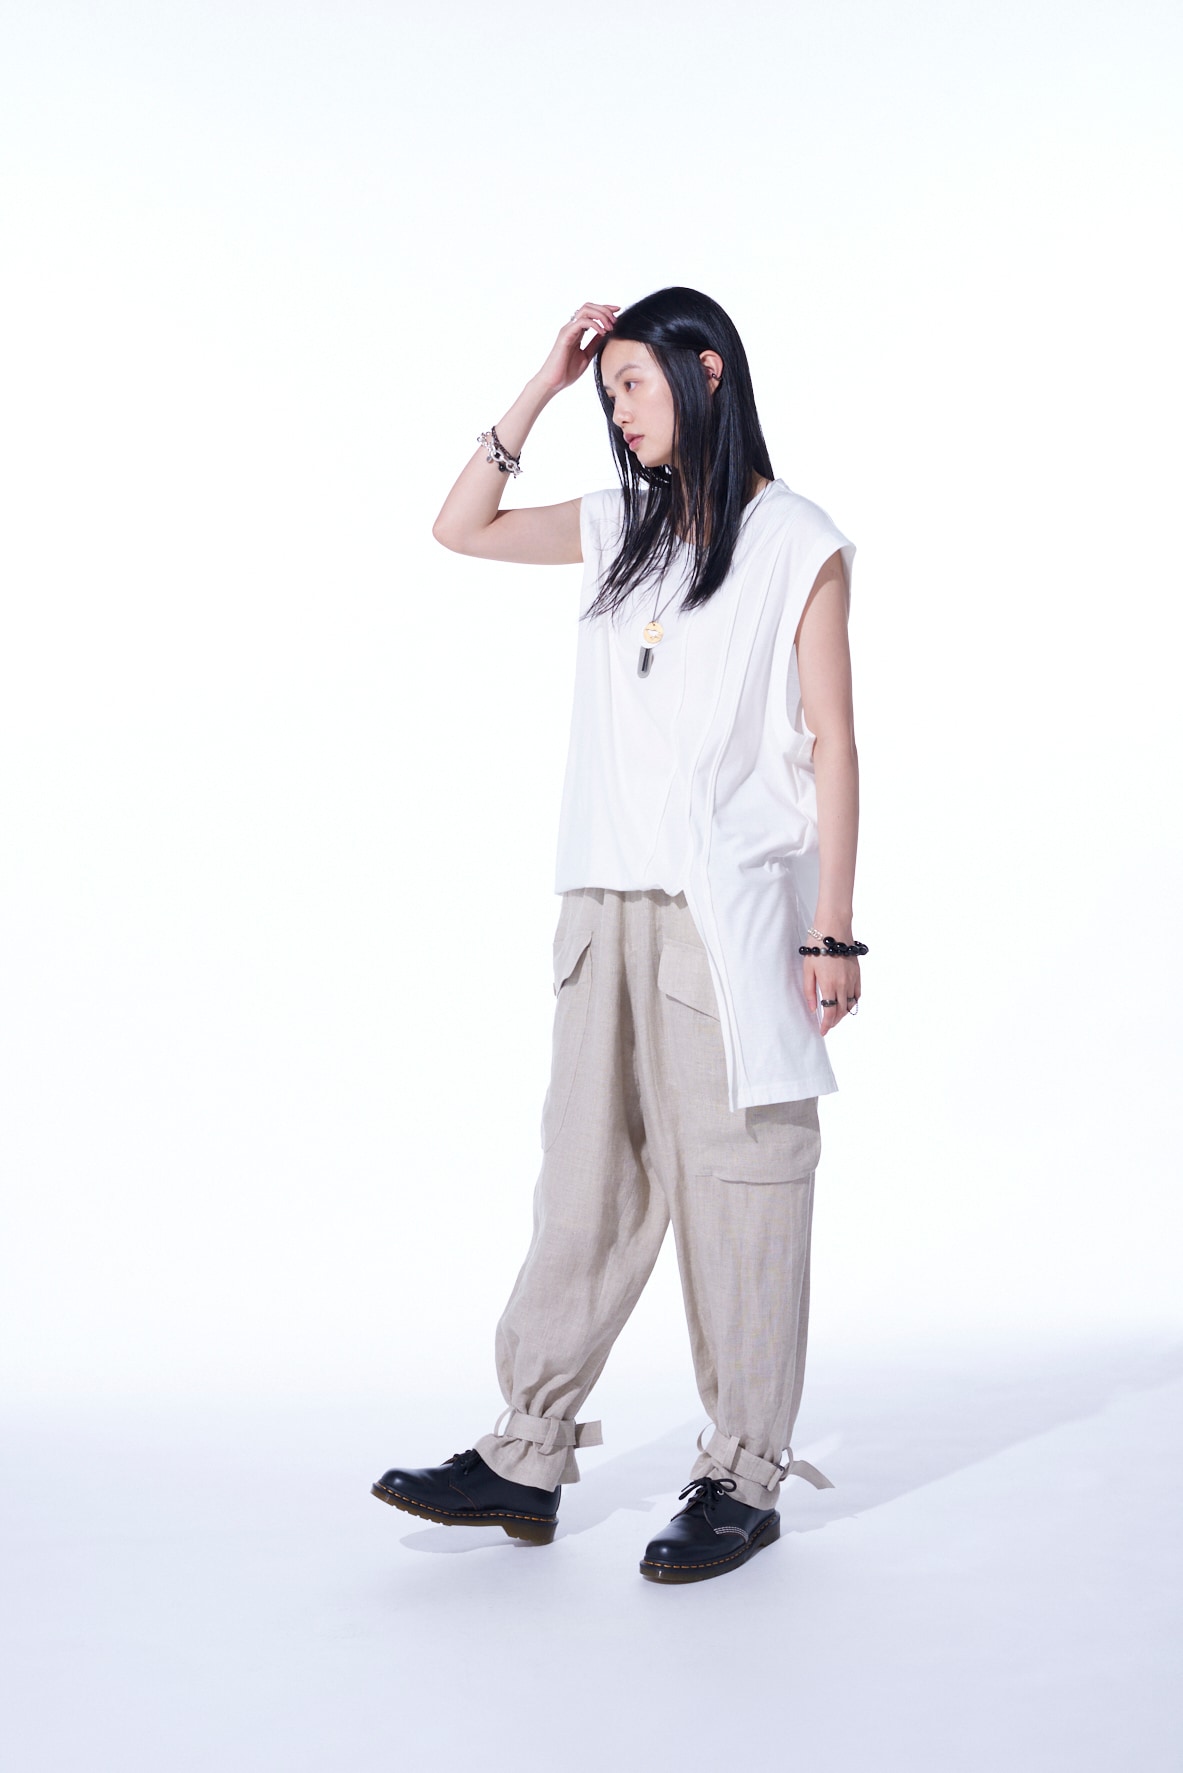 LINEN GAUZE CARGO PANTS WITH BELTED HEMS